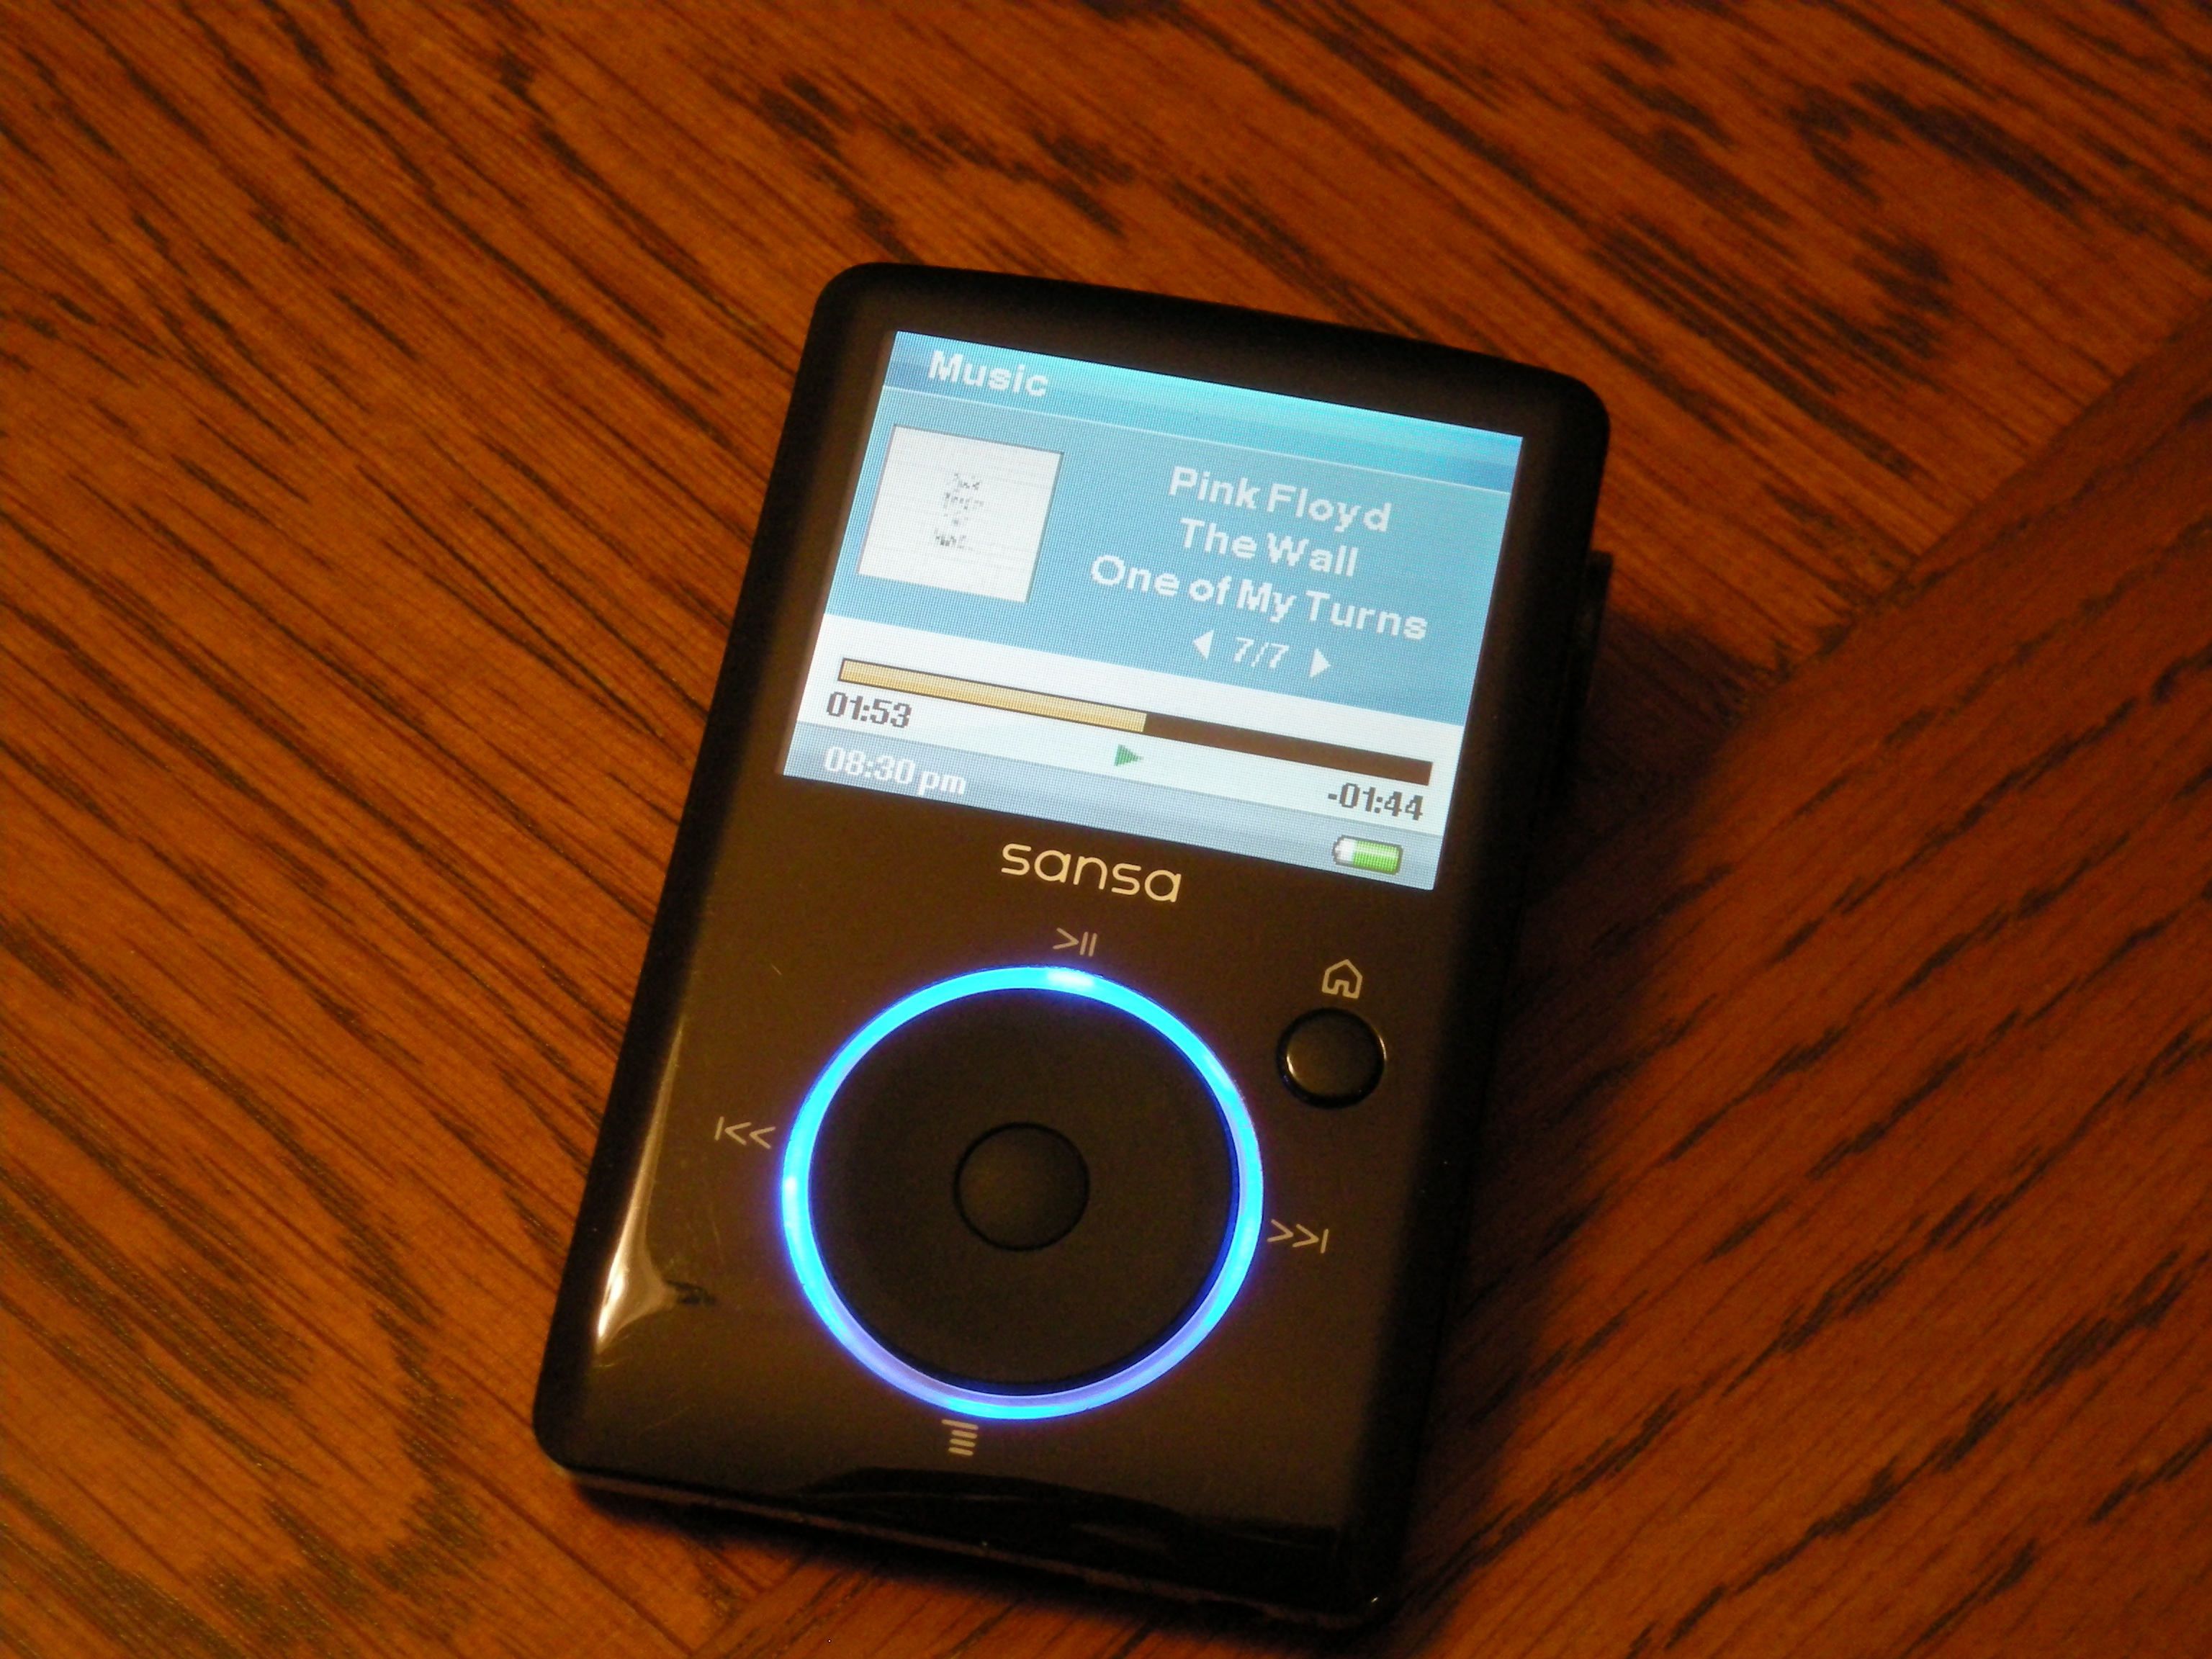 How to download music from rhapsody to mp3 player free